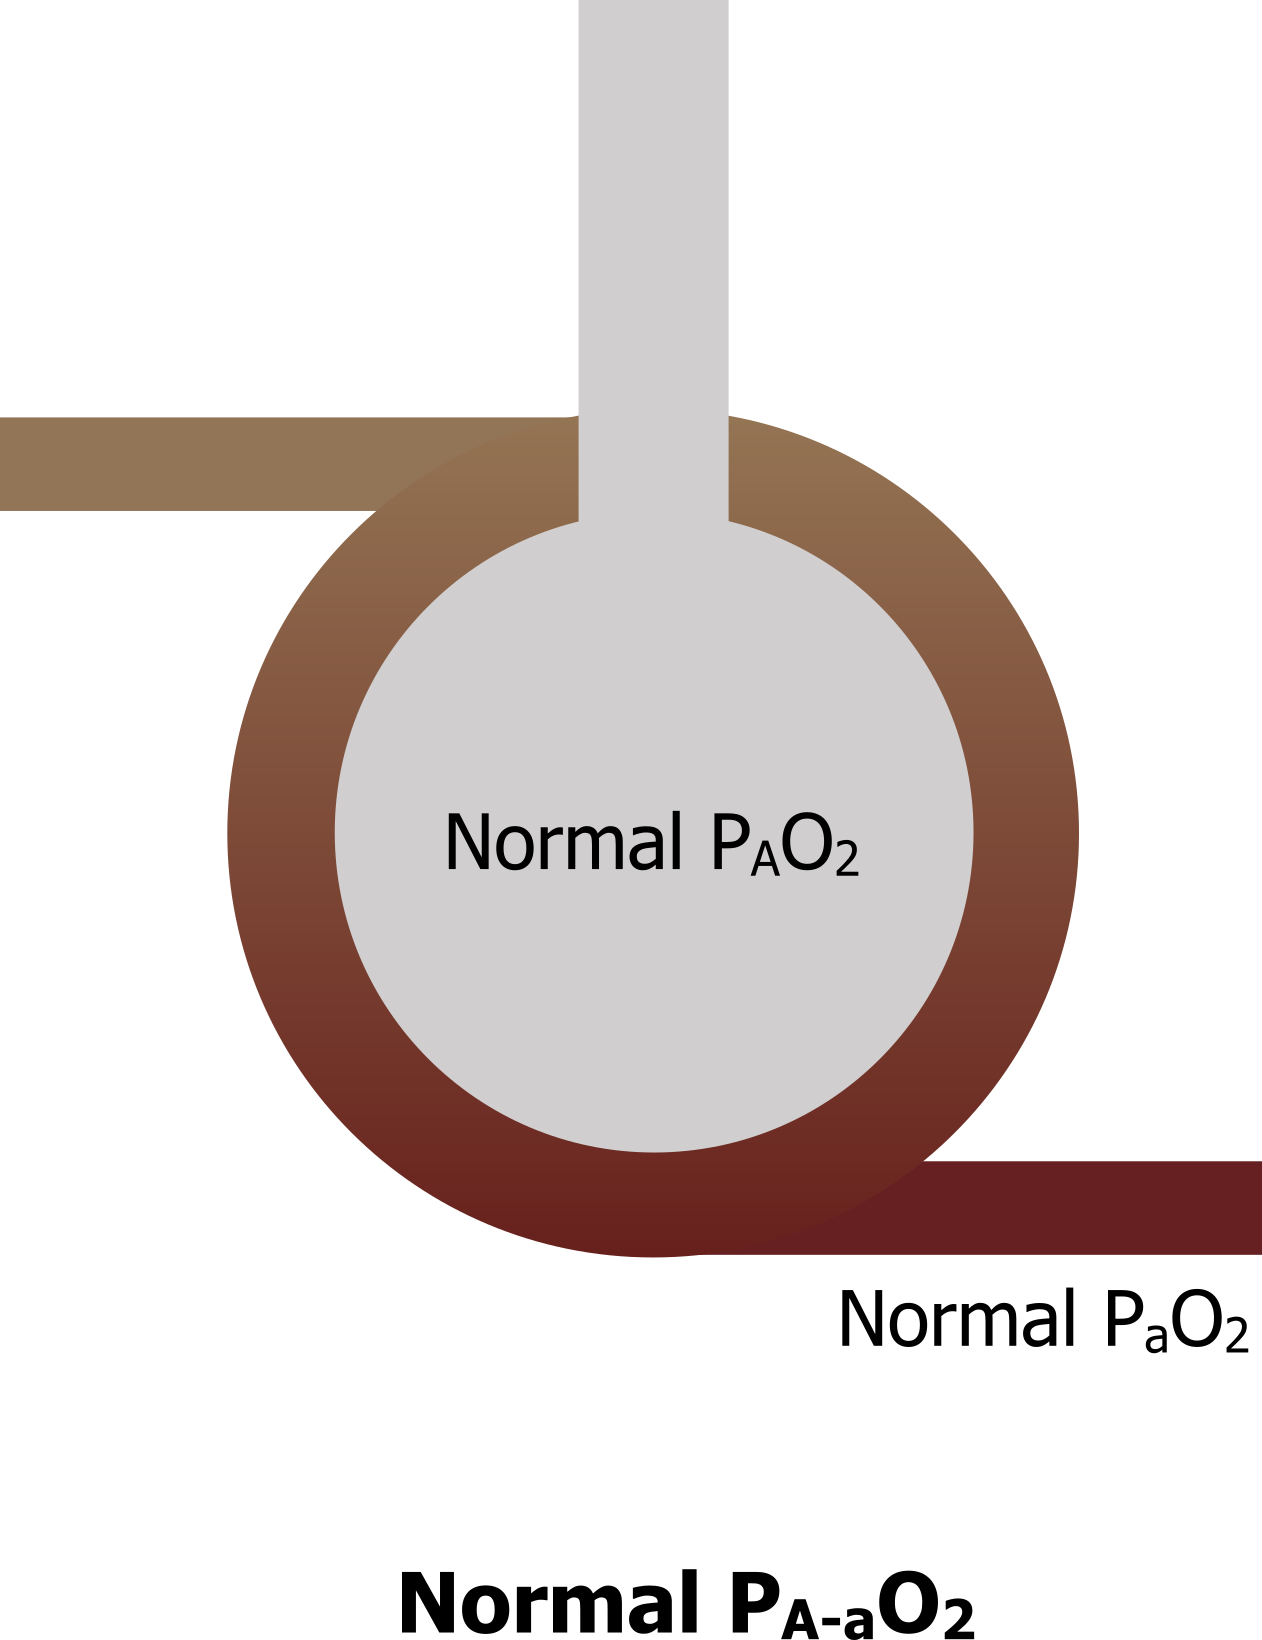 Normal PA-aO2. Alveolus with text Normal PAO2. Deoxygenated blood enters the surrounding capillaries and leaves oxygenated with text Normal PaO2.